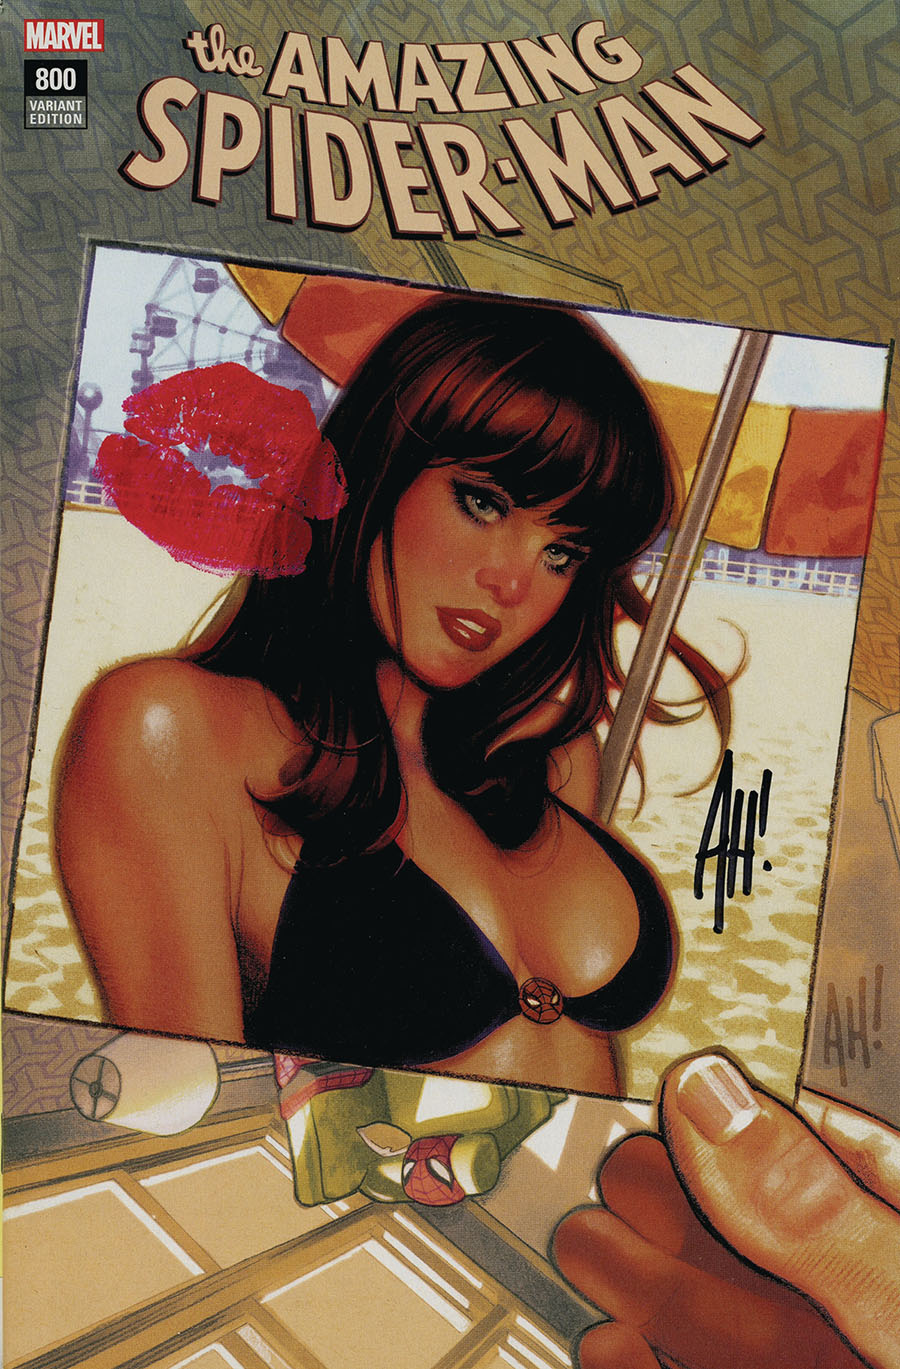 Amazing Spider-Man Vol 4 #800 Cover Z-L DF Exclusive Adam Hughes Variant Cover Signed By Adam Hughes